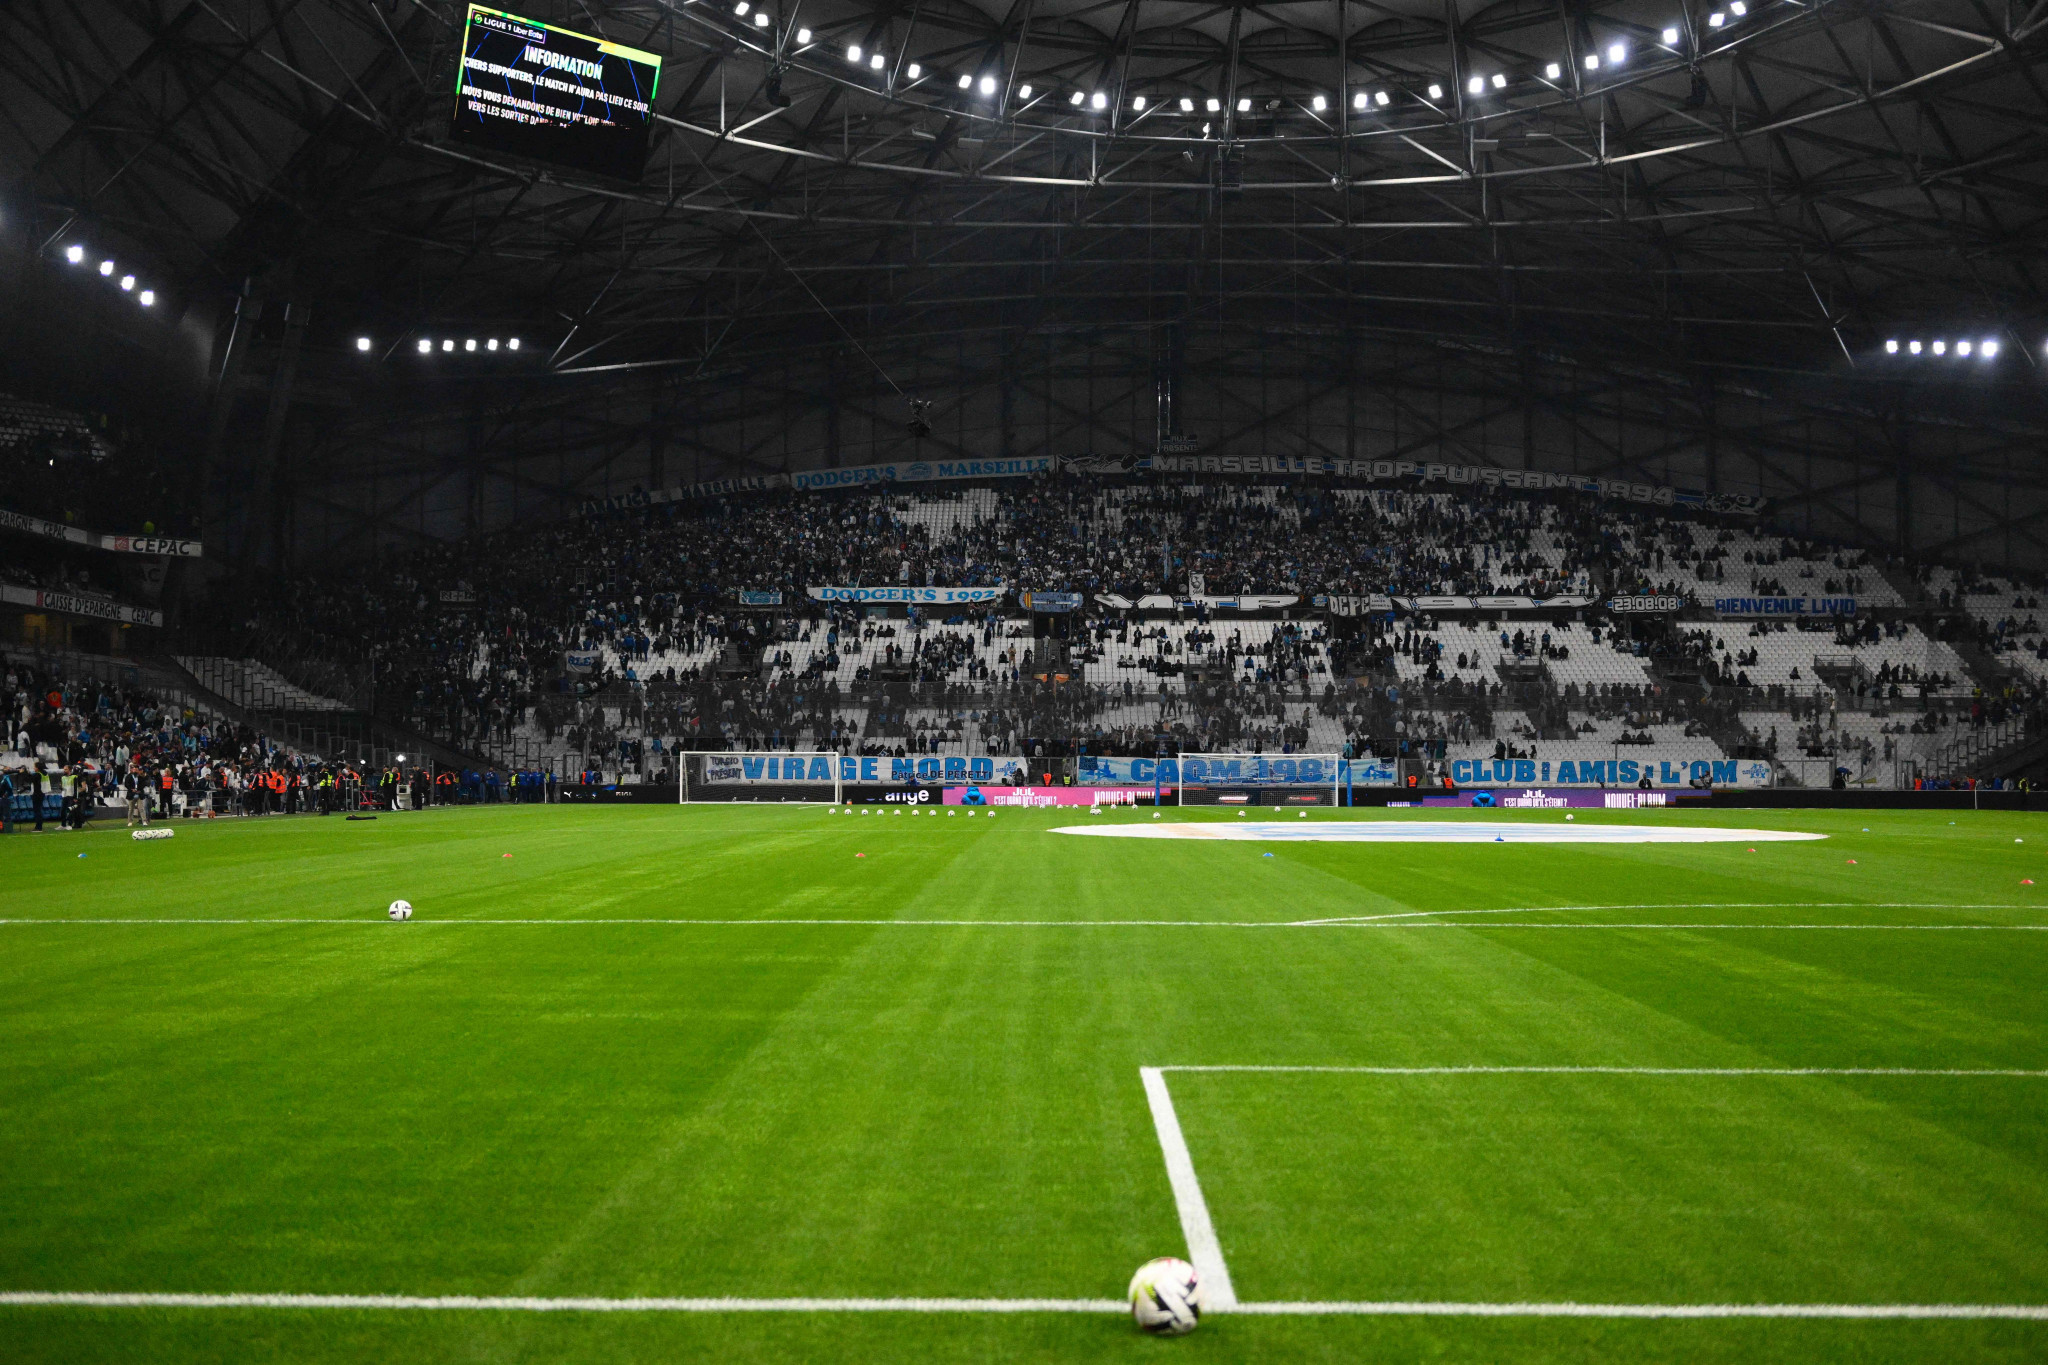 Supporters were already inside the Stade Velodrome at the time that the match was postponed ©Getty Images